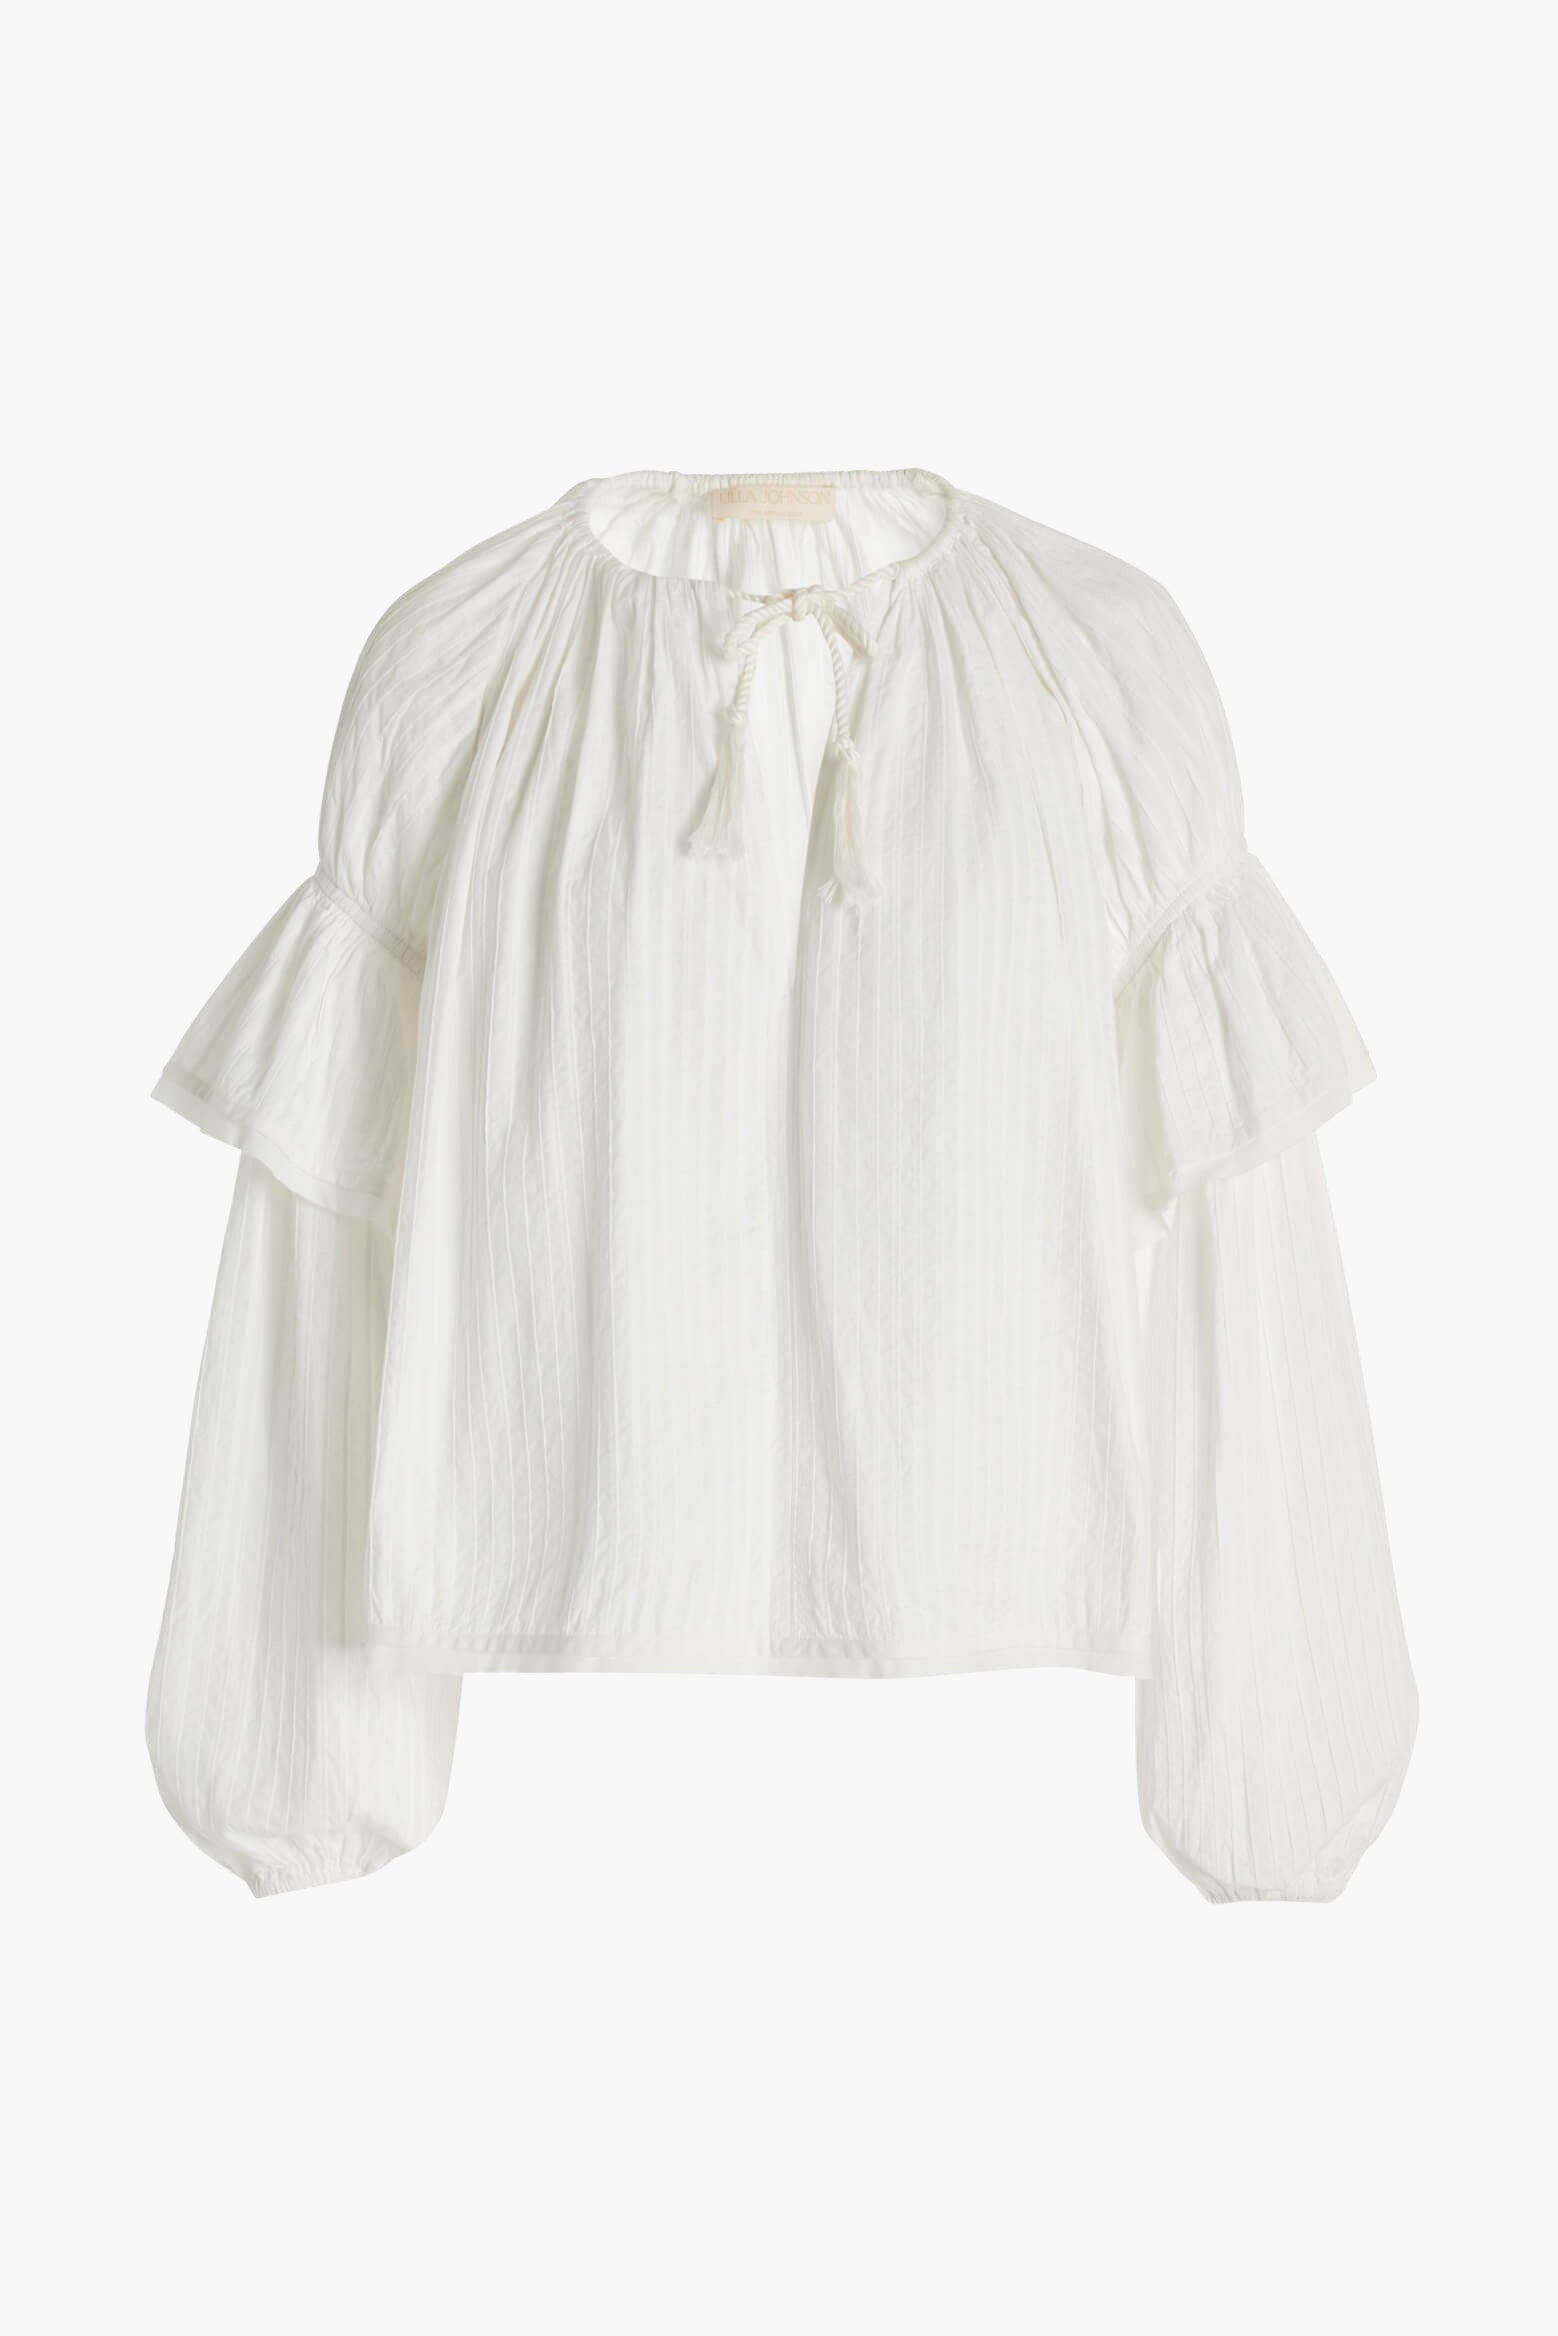 Ulla Johnson Concetta Blouse in Cowrie available at The New Trend